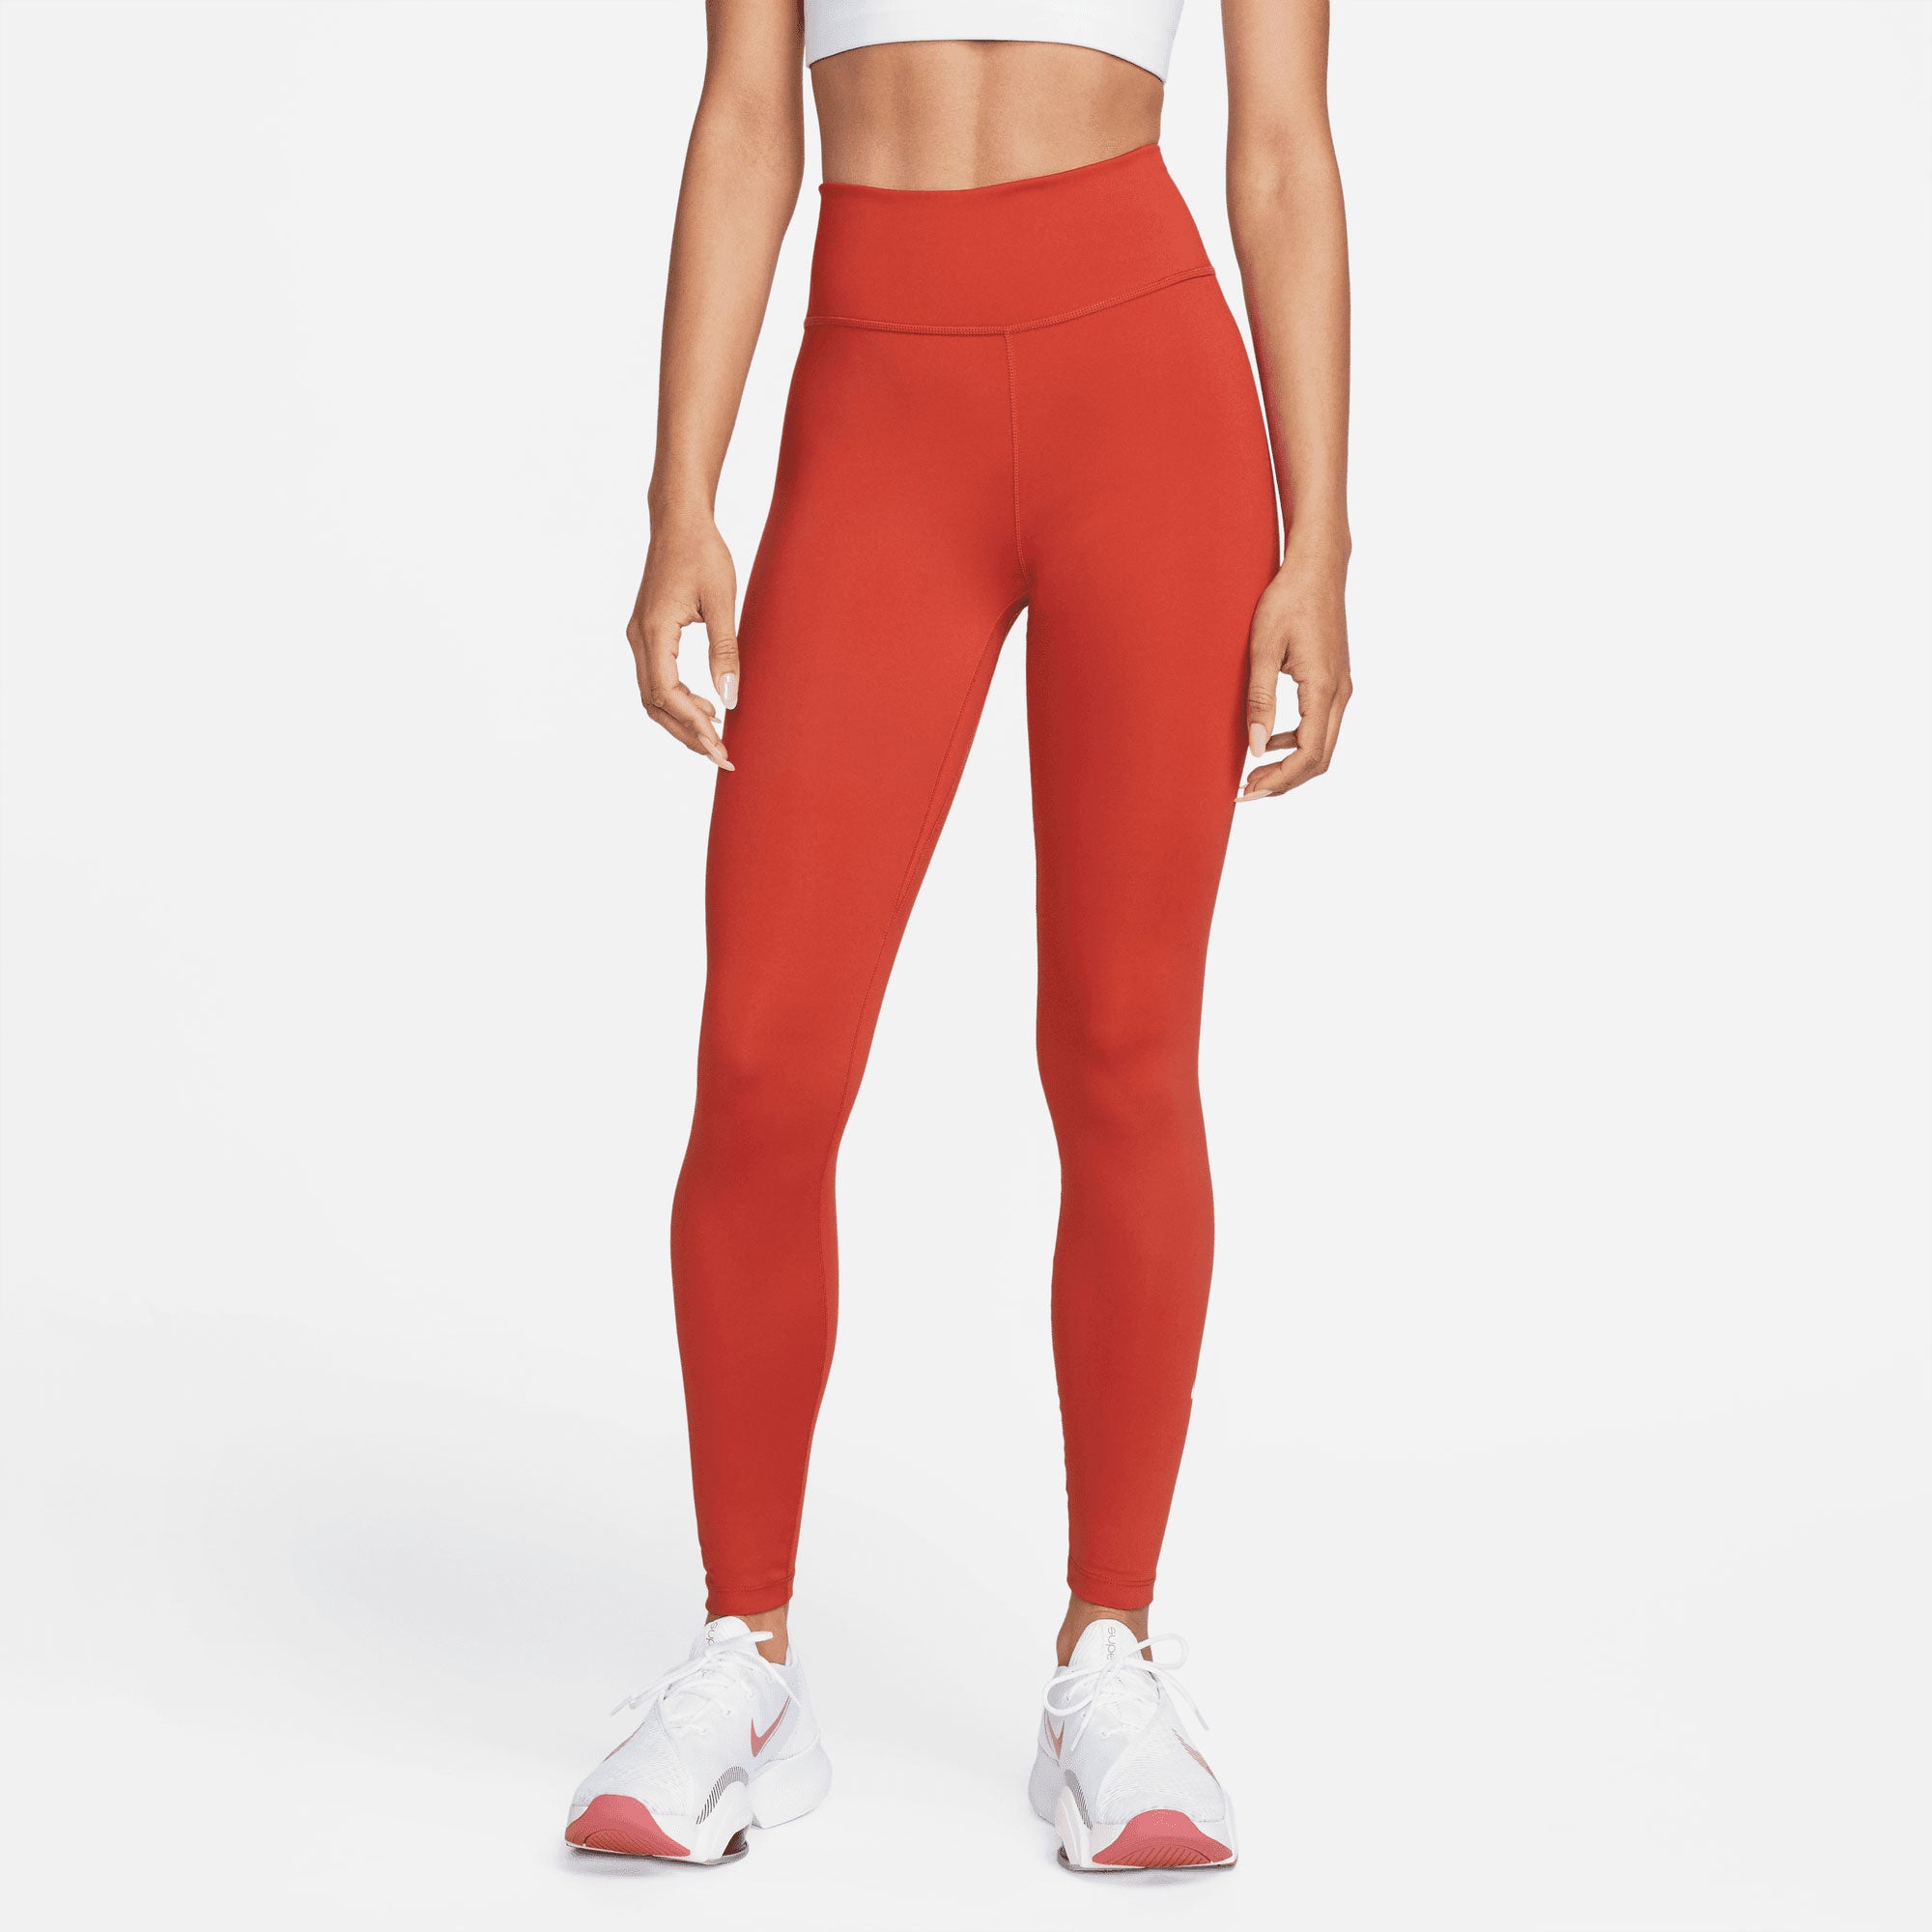 Nike One Dri-FIT Women's Mid-Rise Tights - Red